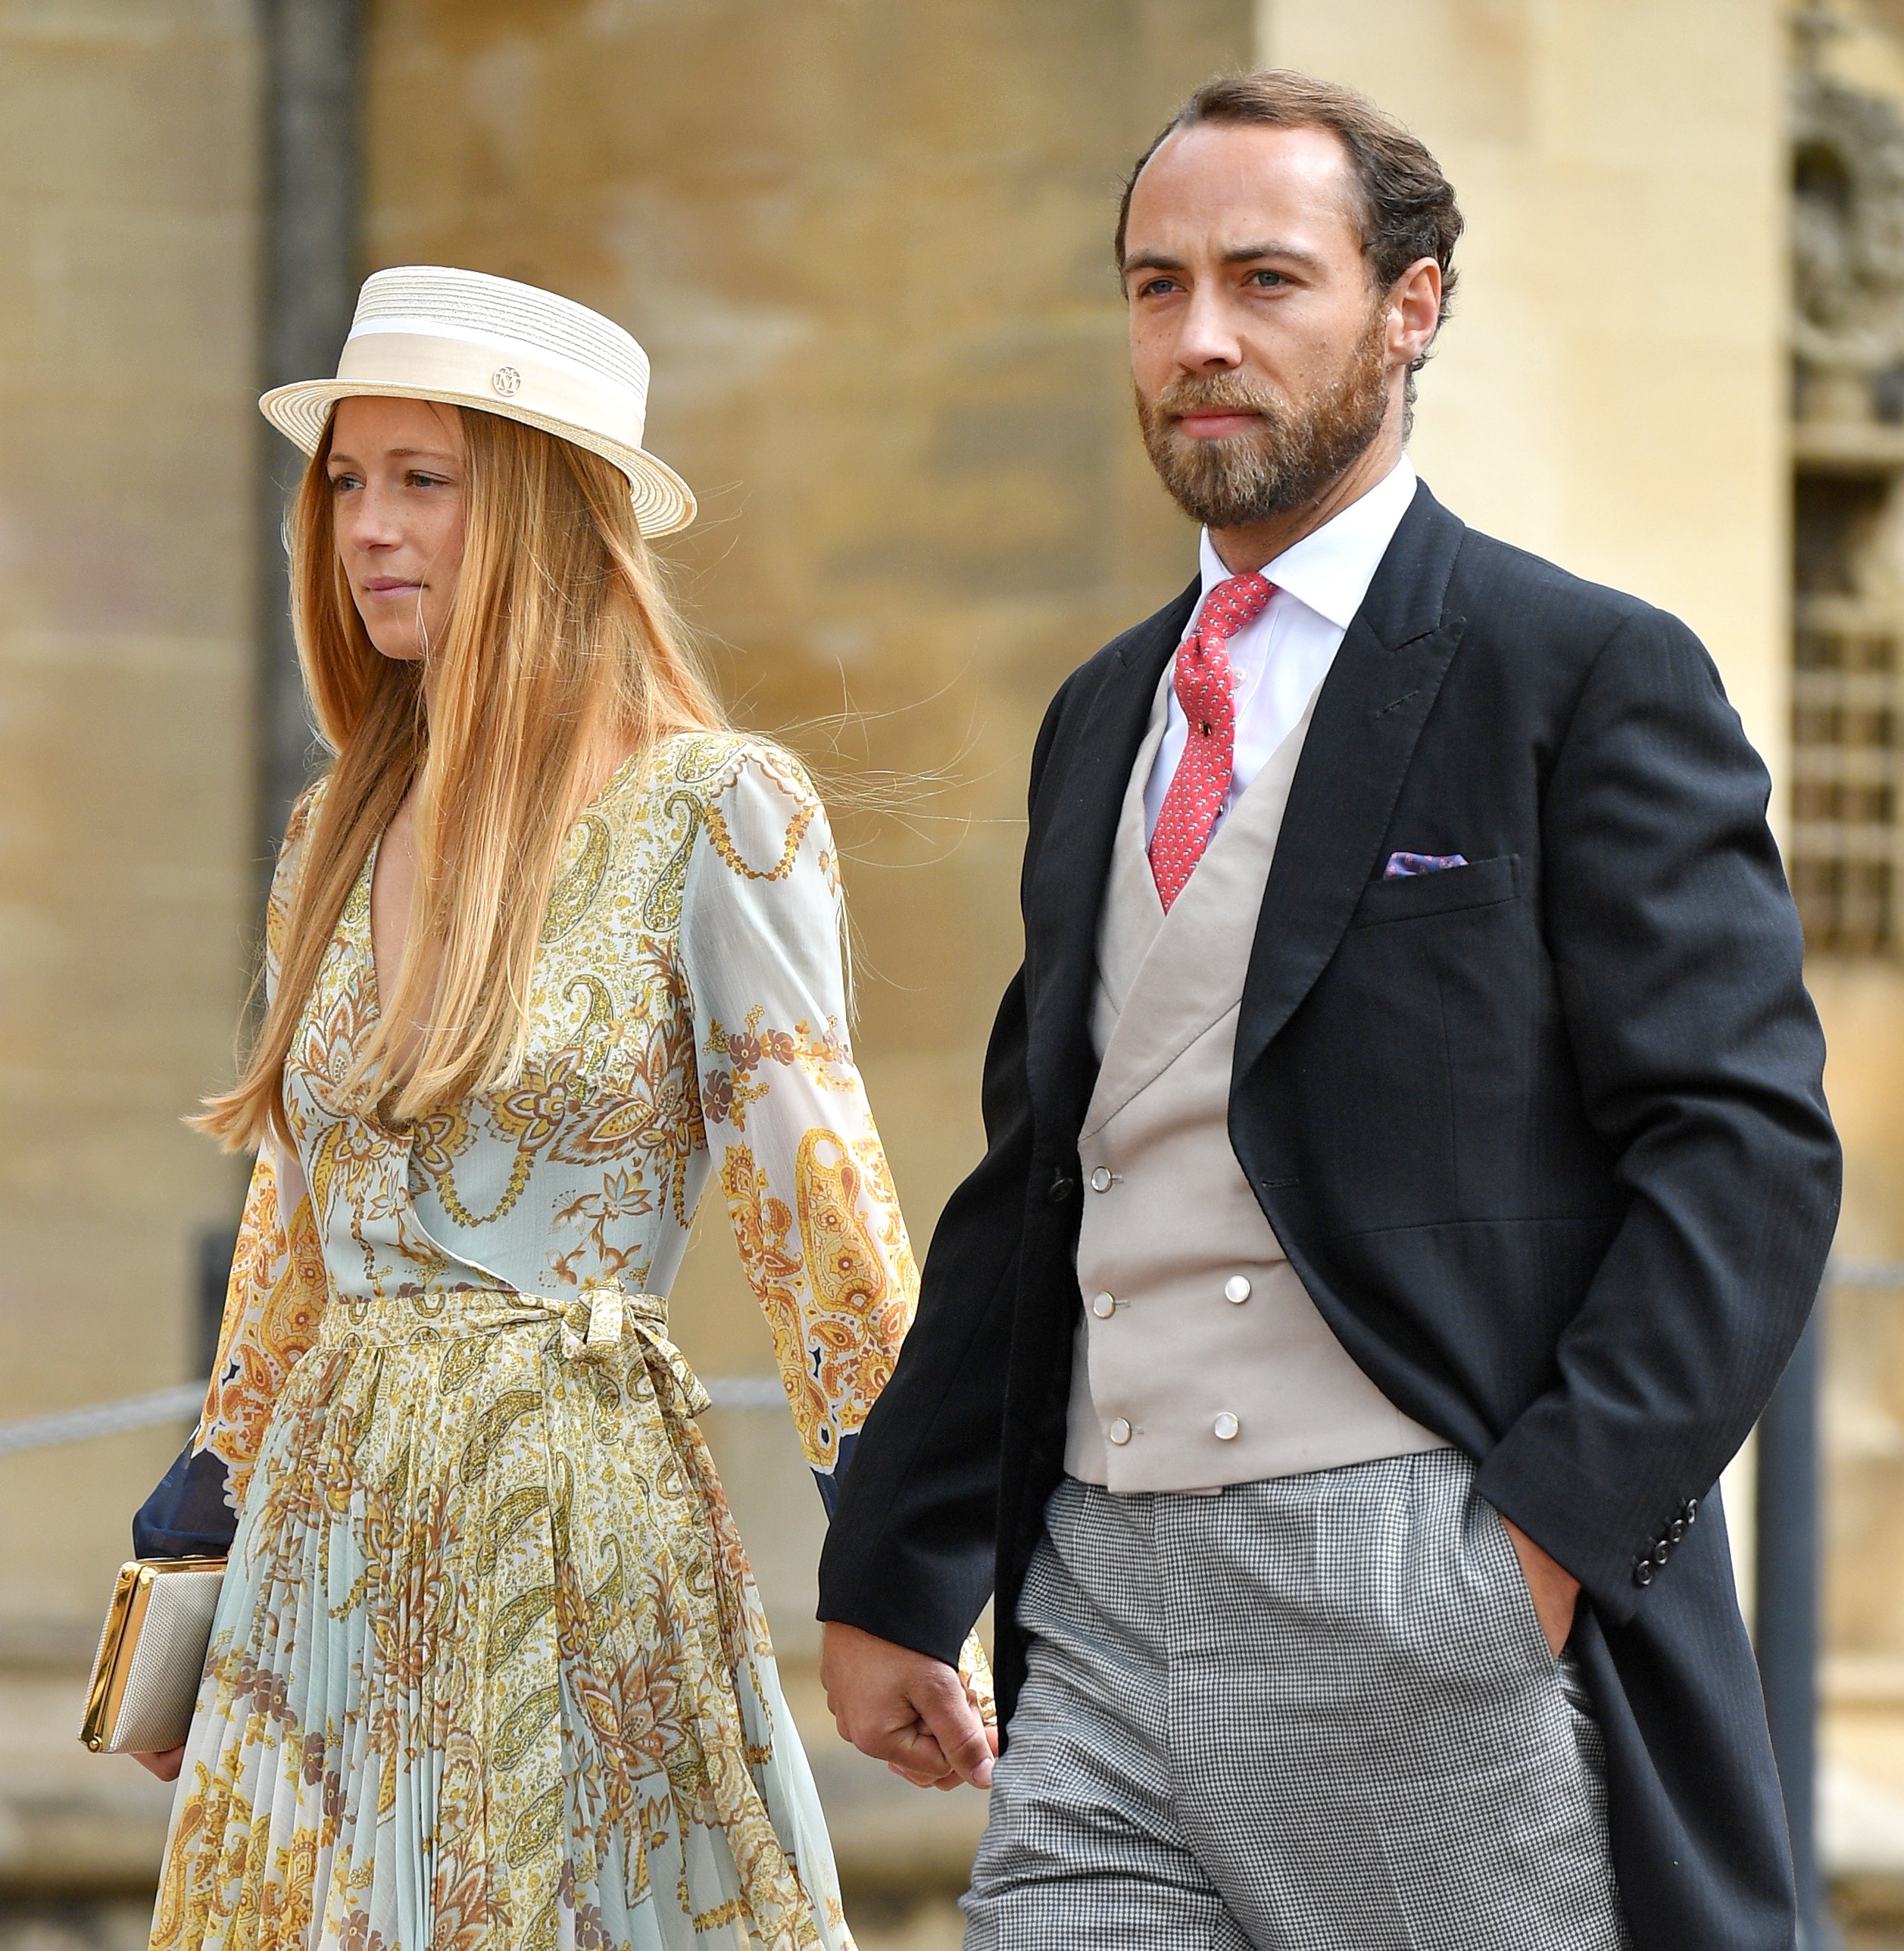 James Middleton and fiance Alizee Thevenet attend the wedding of Lady Gabriella and Thomas Kingston in 2019. | Photo: Getty Images